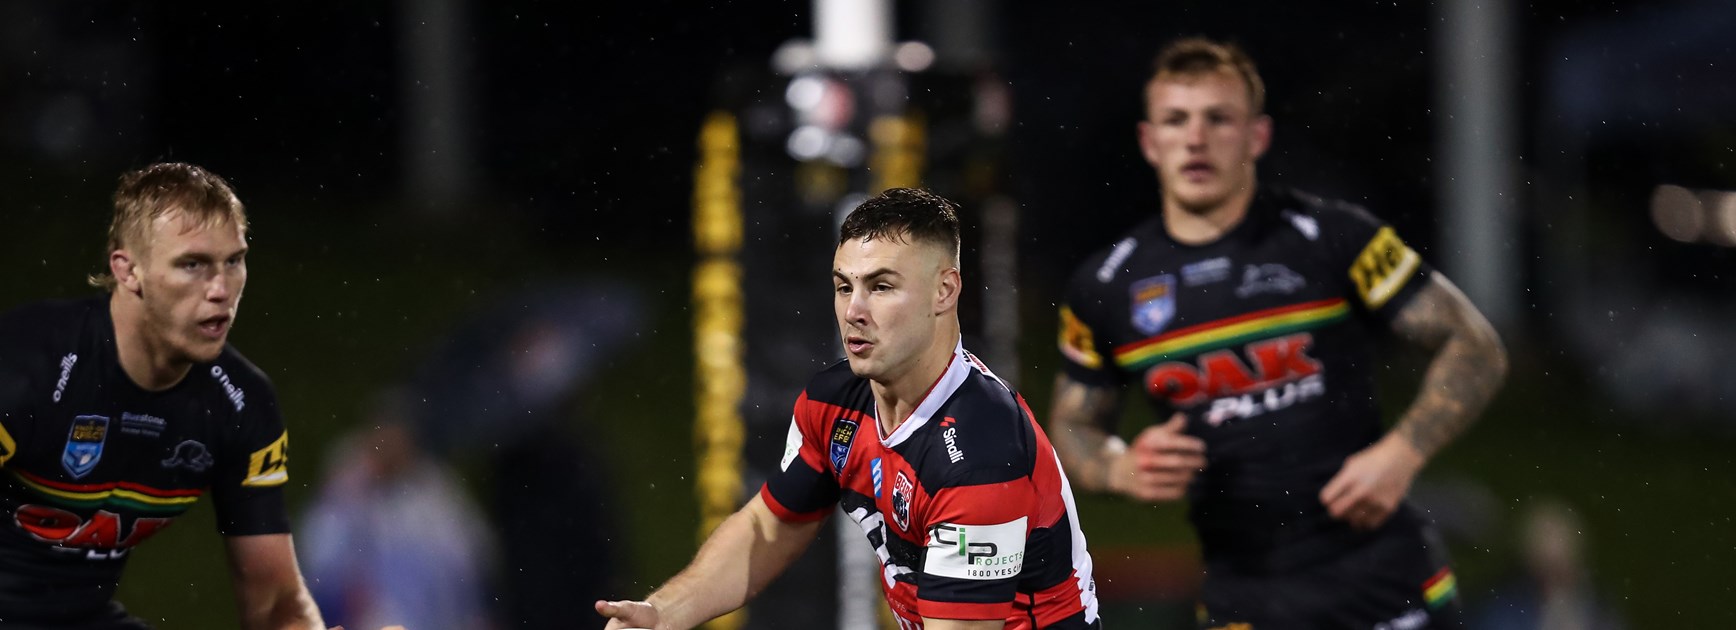 Panther cubs kick off NSW Cup finals with remarkable win